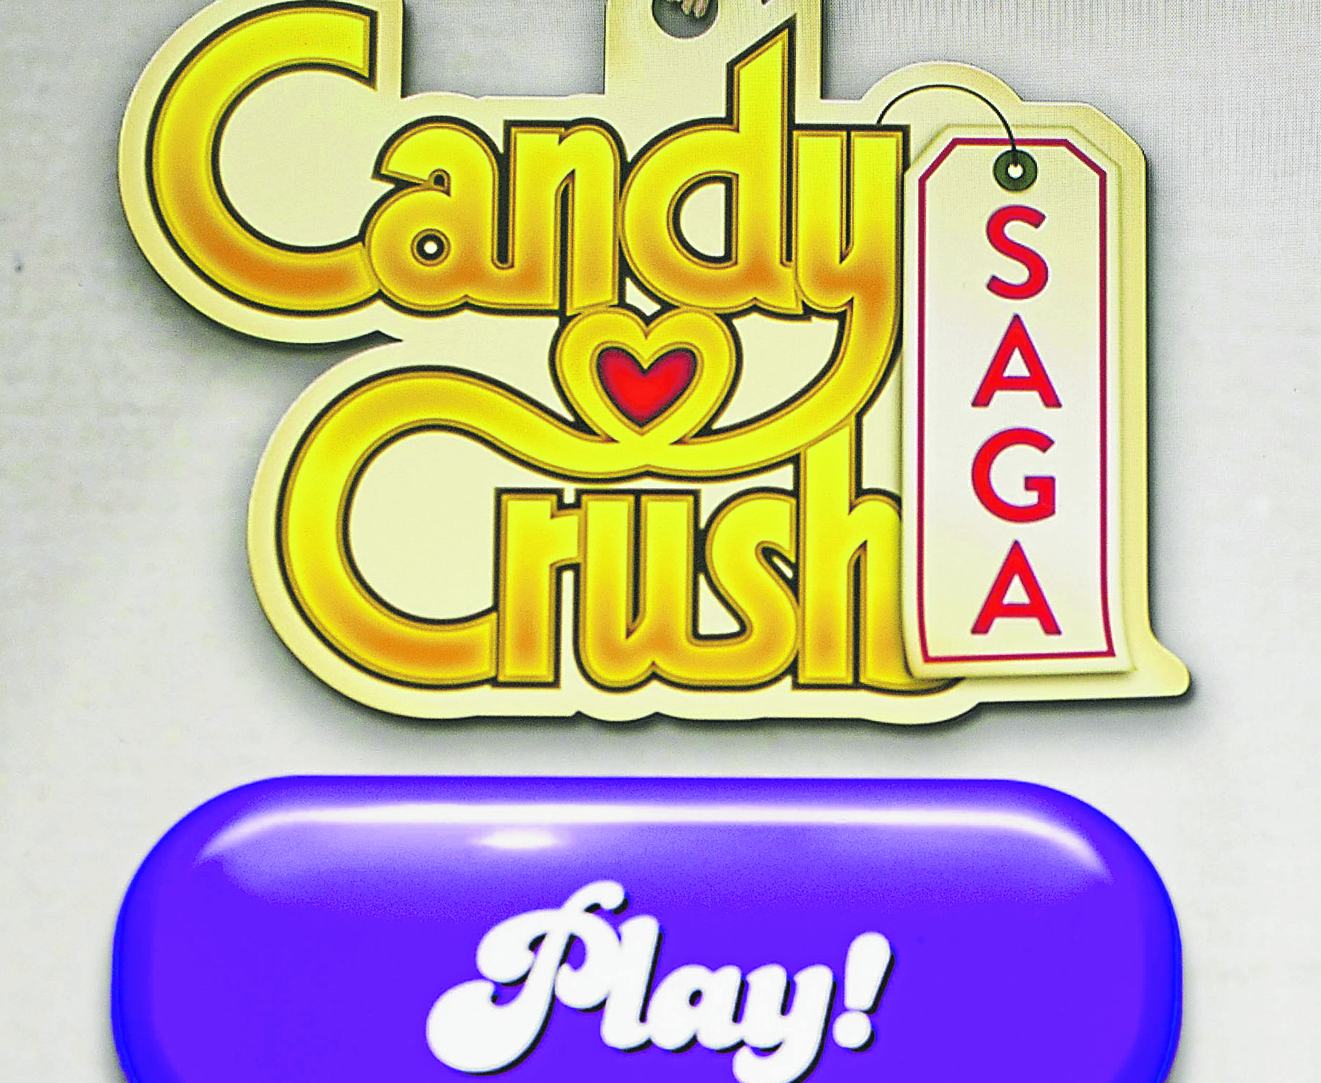 The "Candy Crush Saga" game and King Digital Entertainment Plc logo are displayed on an Apple Inc. iPad Air and iPhone 5s in this arranged photograph in Washington, D.C., U.S., on Tuesday, Feb. 18, 2014. King Digital Entertainment Plc, the maker of popular smartphone games including "Candy Crush Saga" and "Pet Rescue Saga," is beginning an adventure of its own on a path to becoming a public company. Photographer: Andrew Harrer/Bloomberg